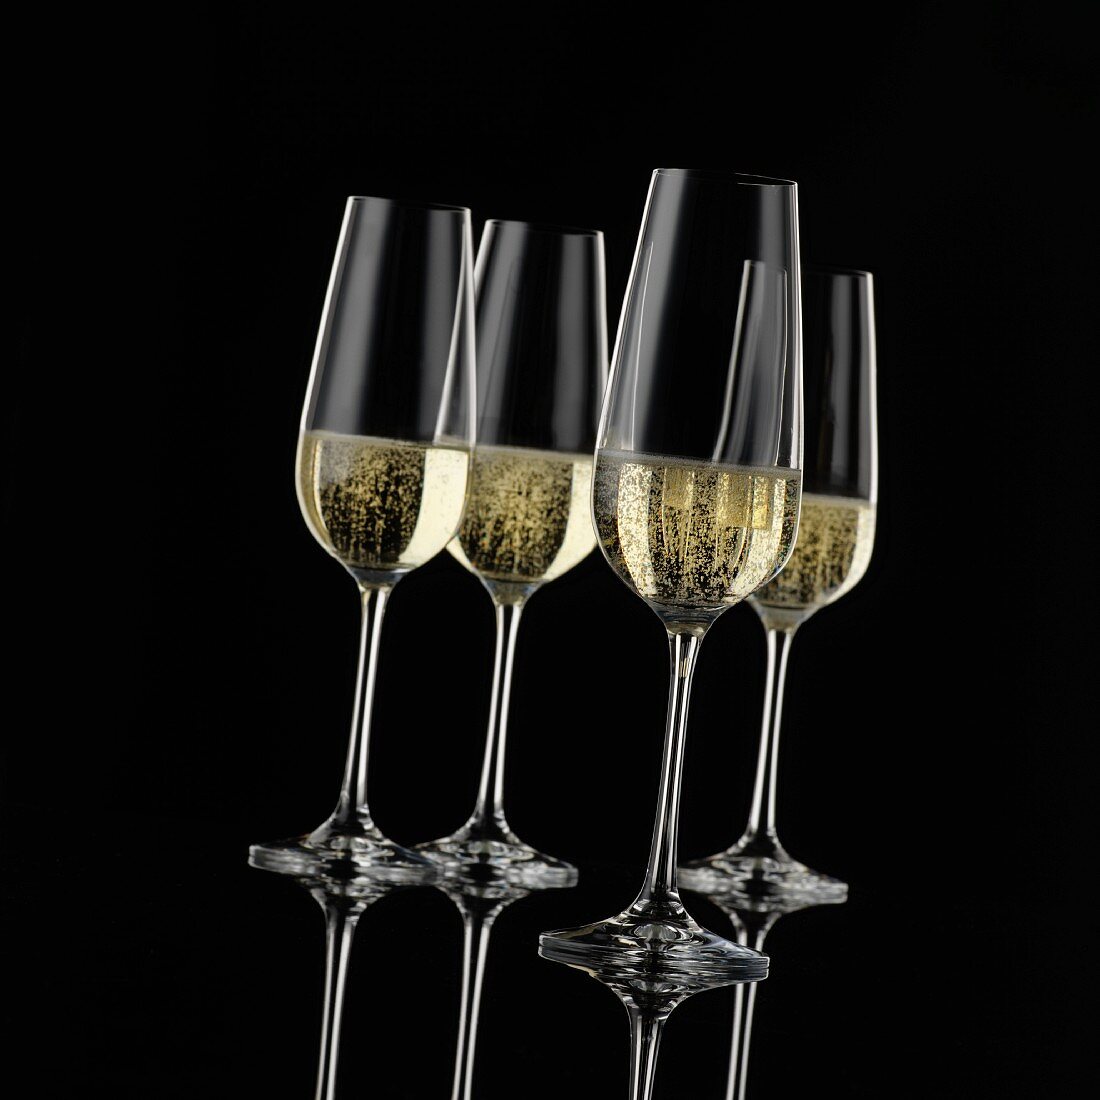 Four champagne glasses in front of a black background